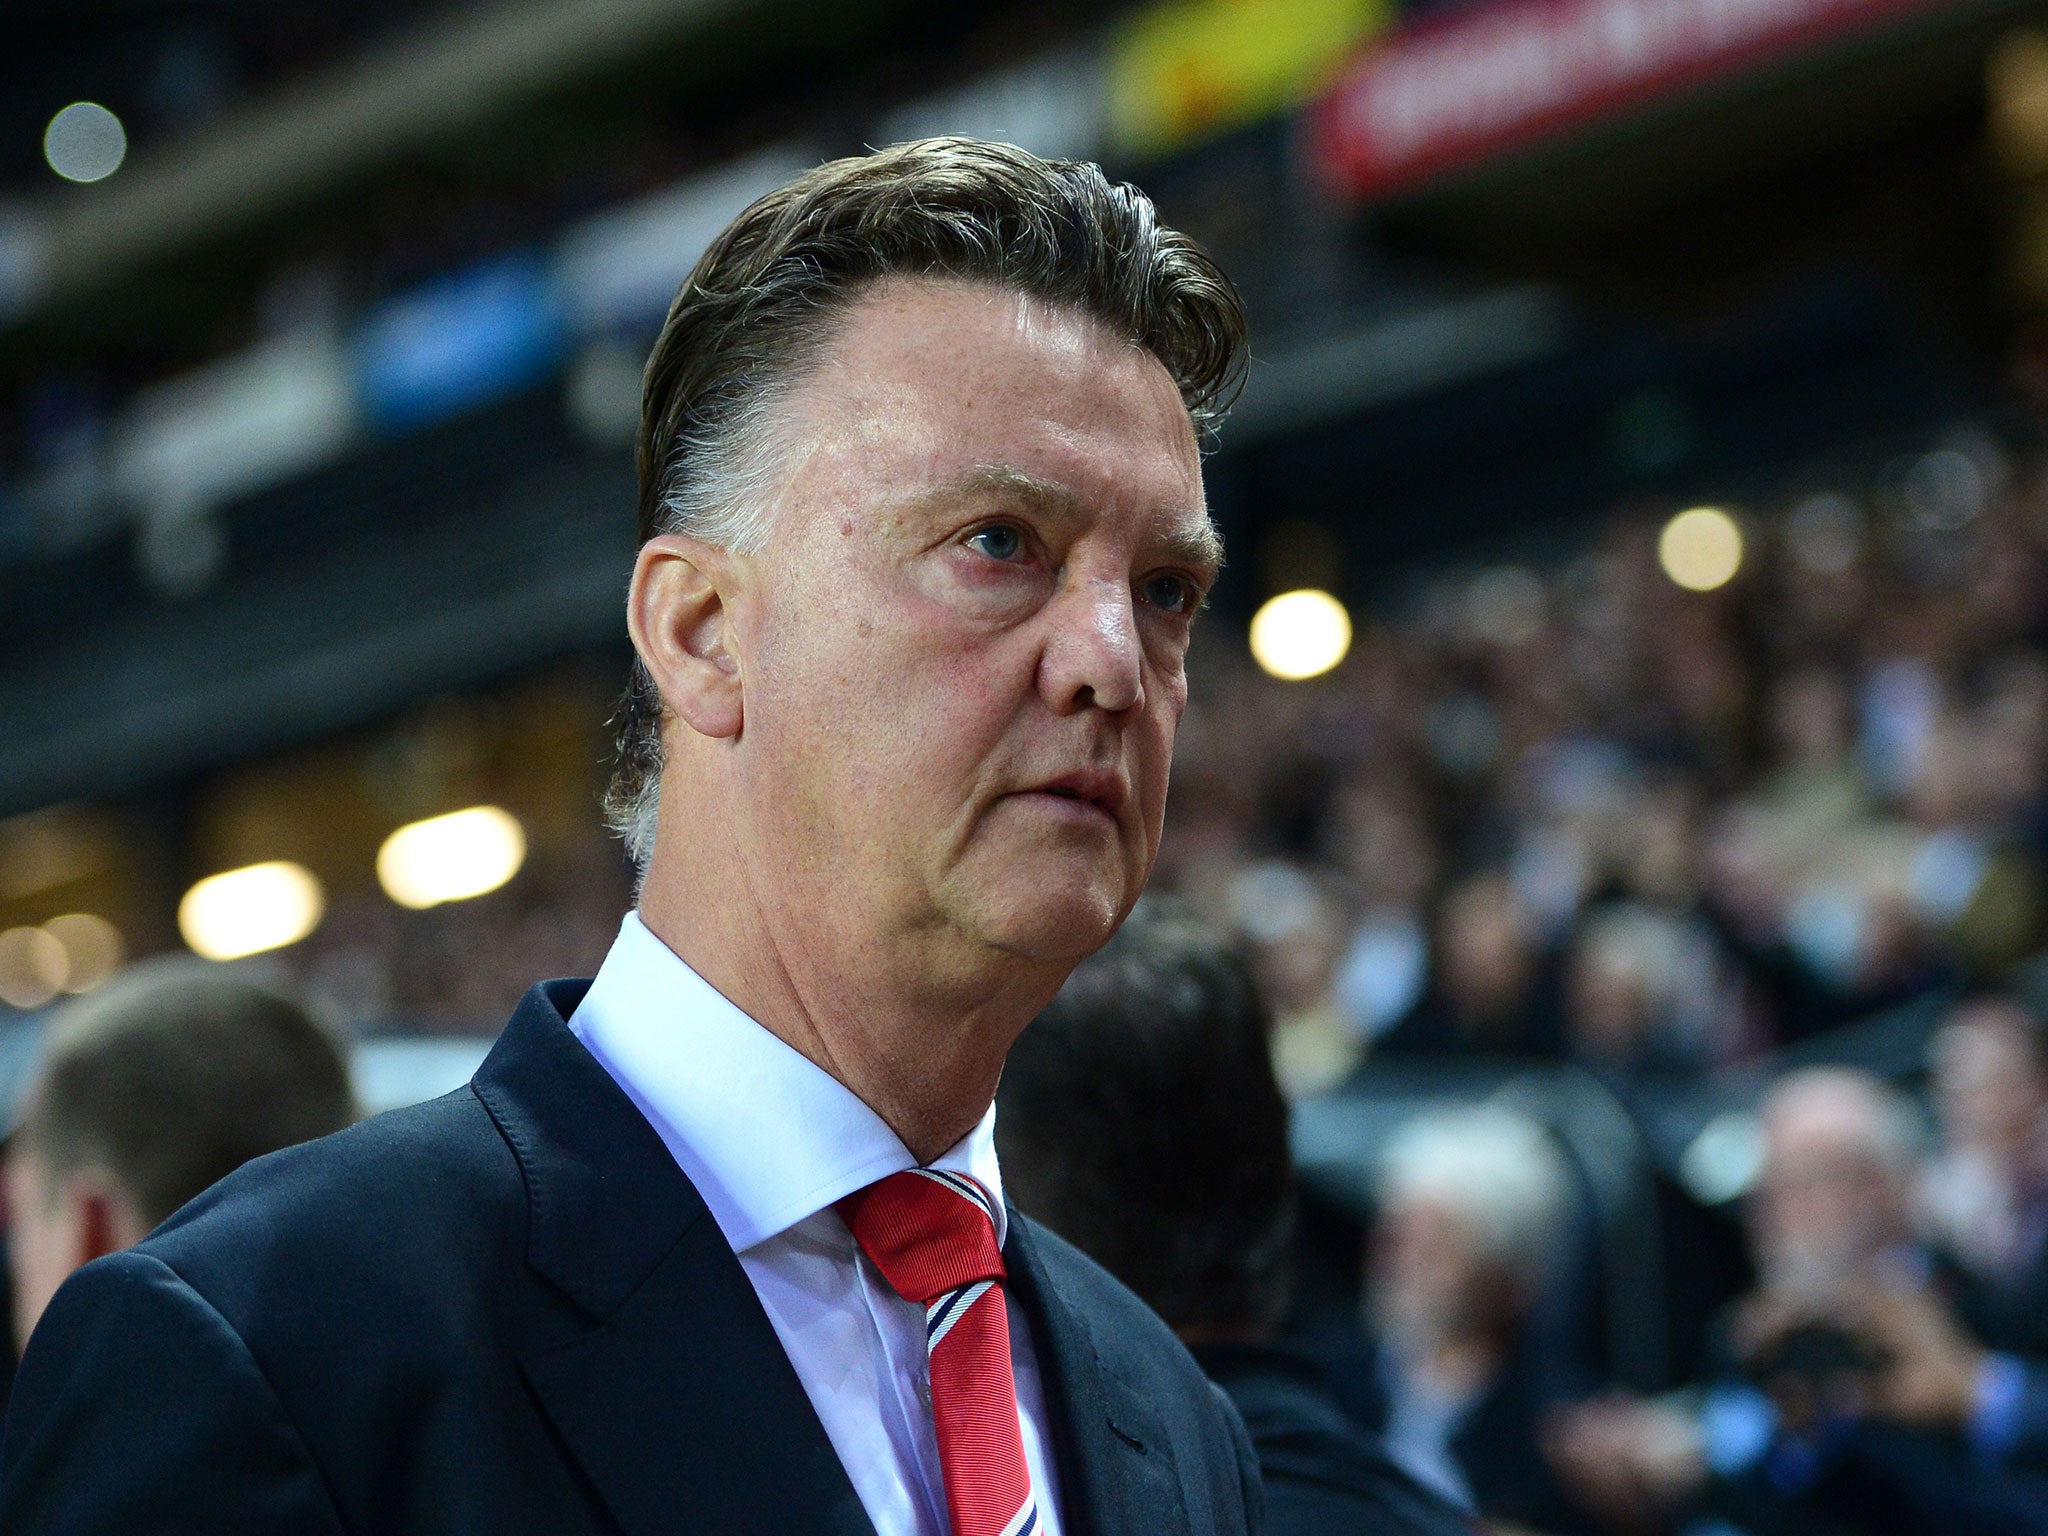 Louis van Gaal looks dejected after Manchester United's 4-0 defeat by MK Dons on Tuesday night